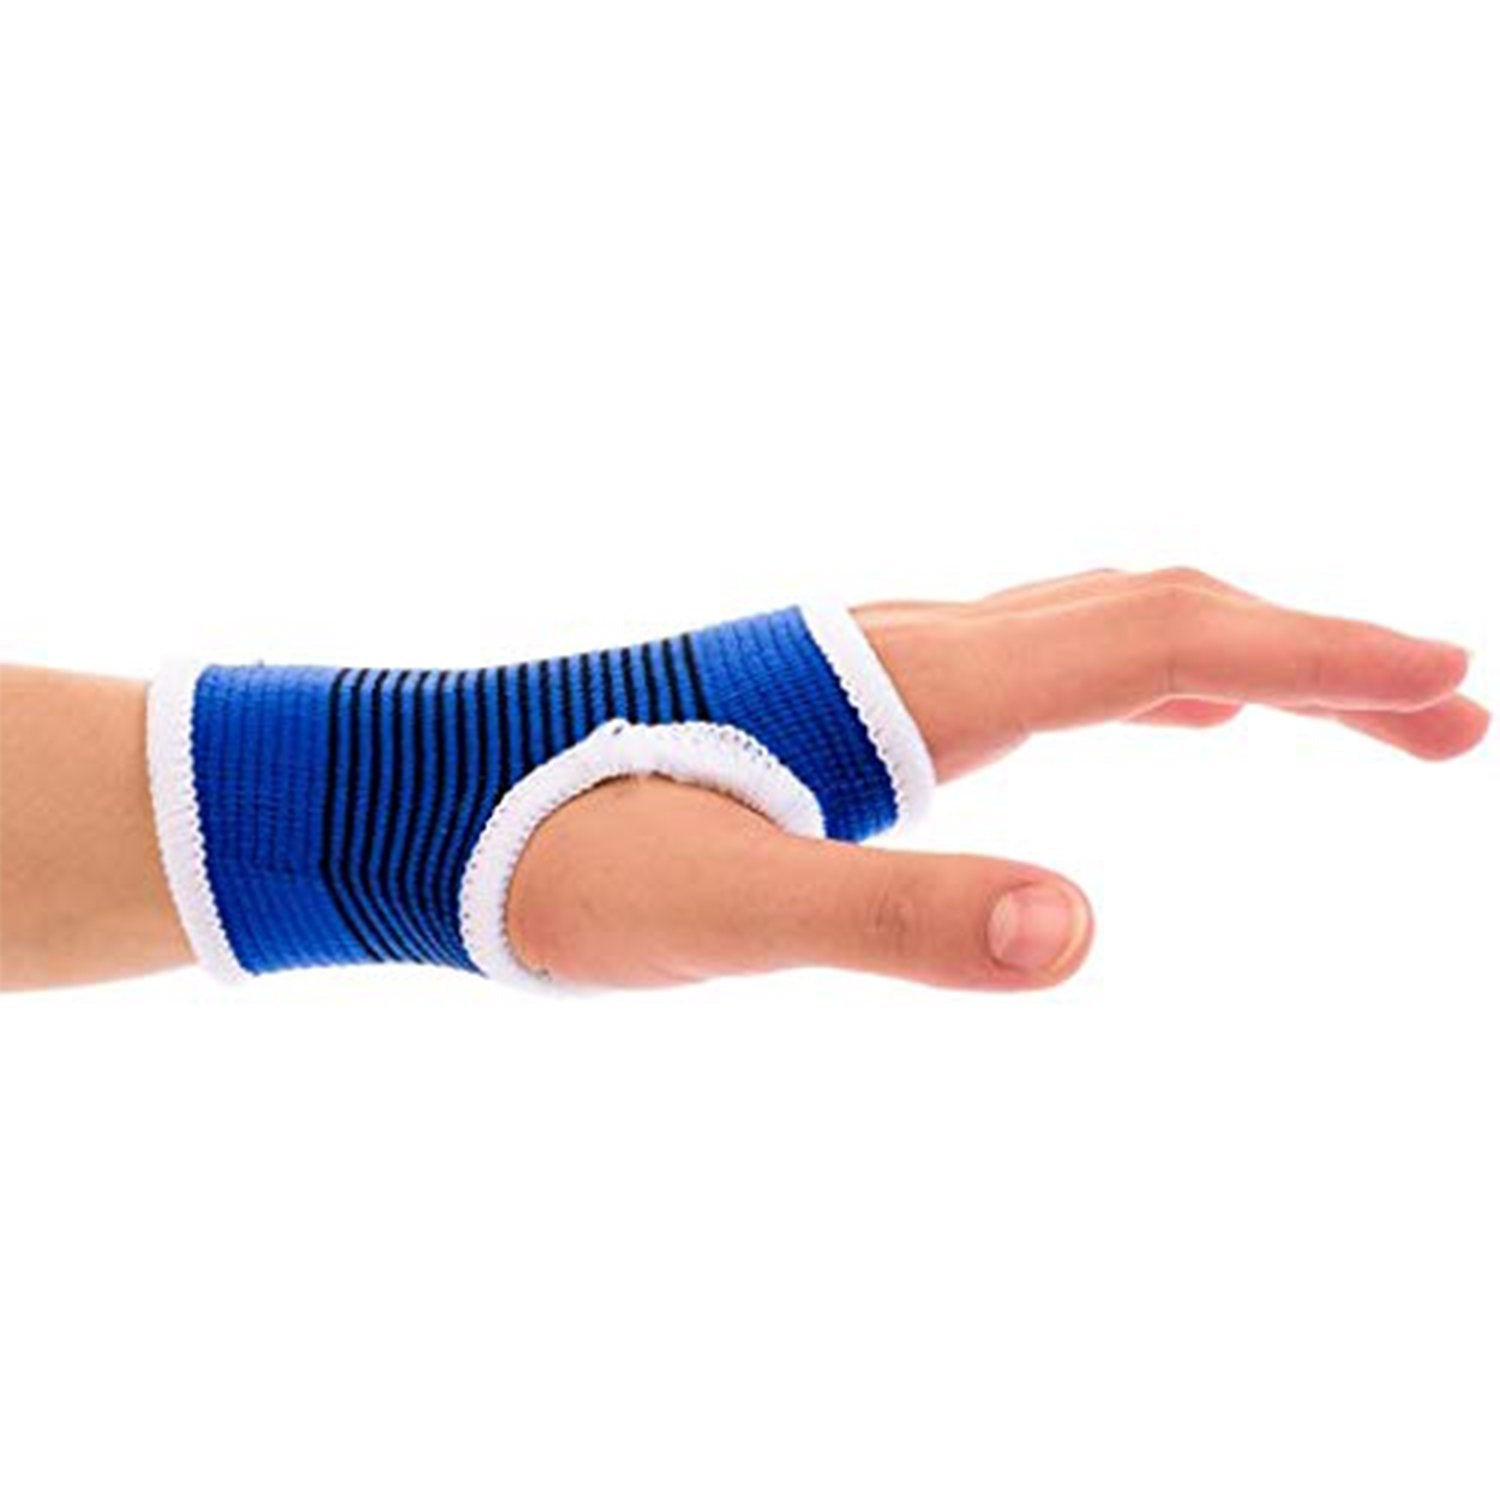 1438 Palm Support Glove Hand Grip Braces for Surgical and Sports Activity (pack of 2) - SkyShopy